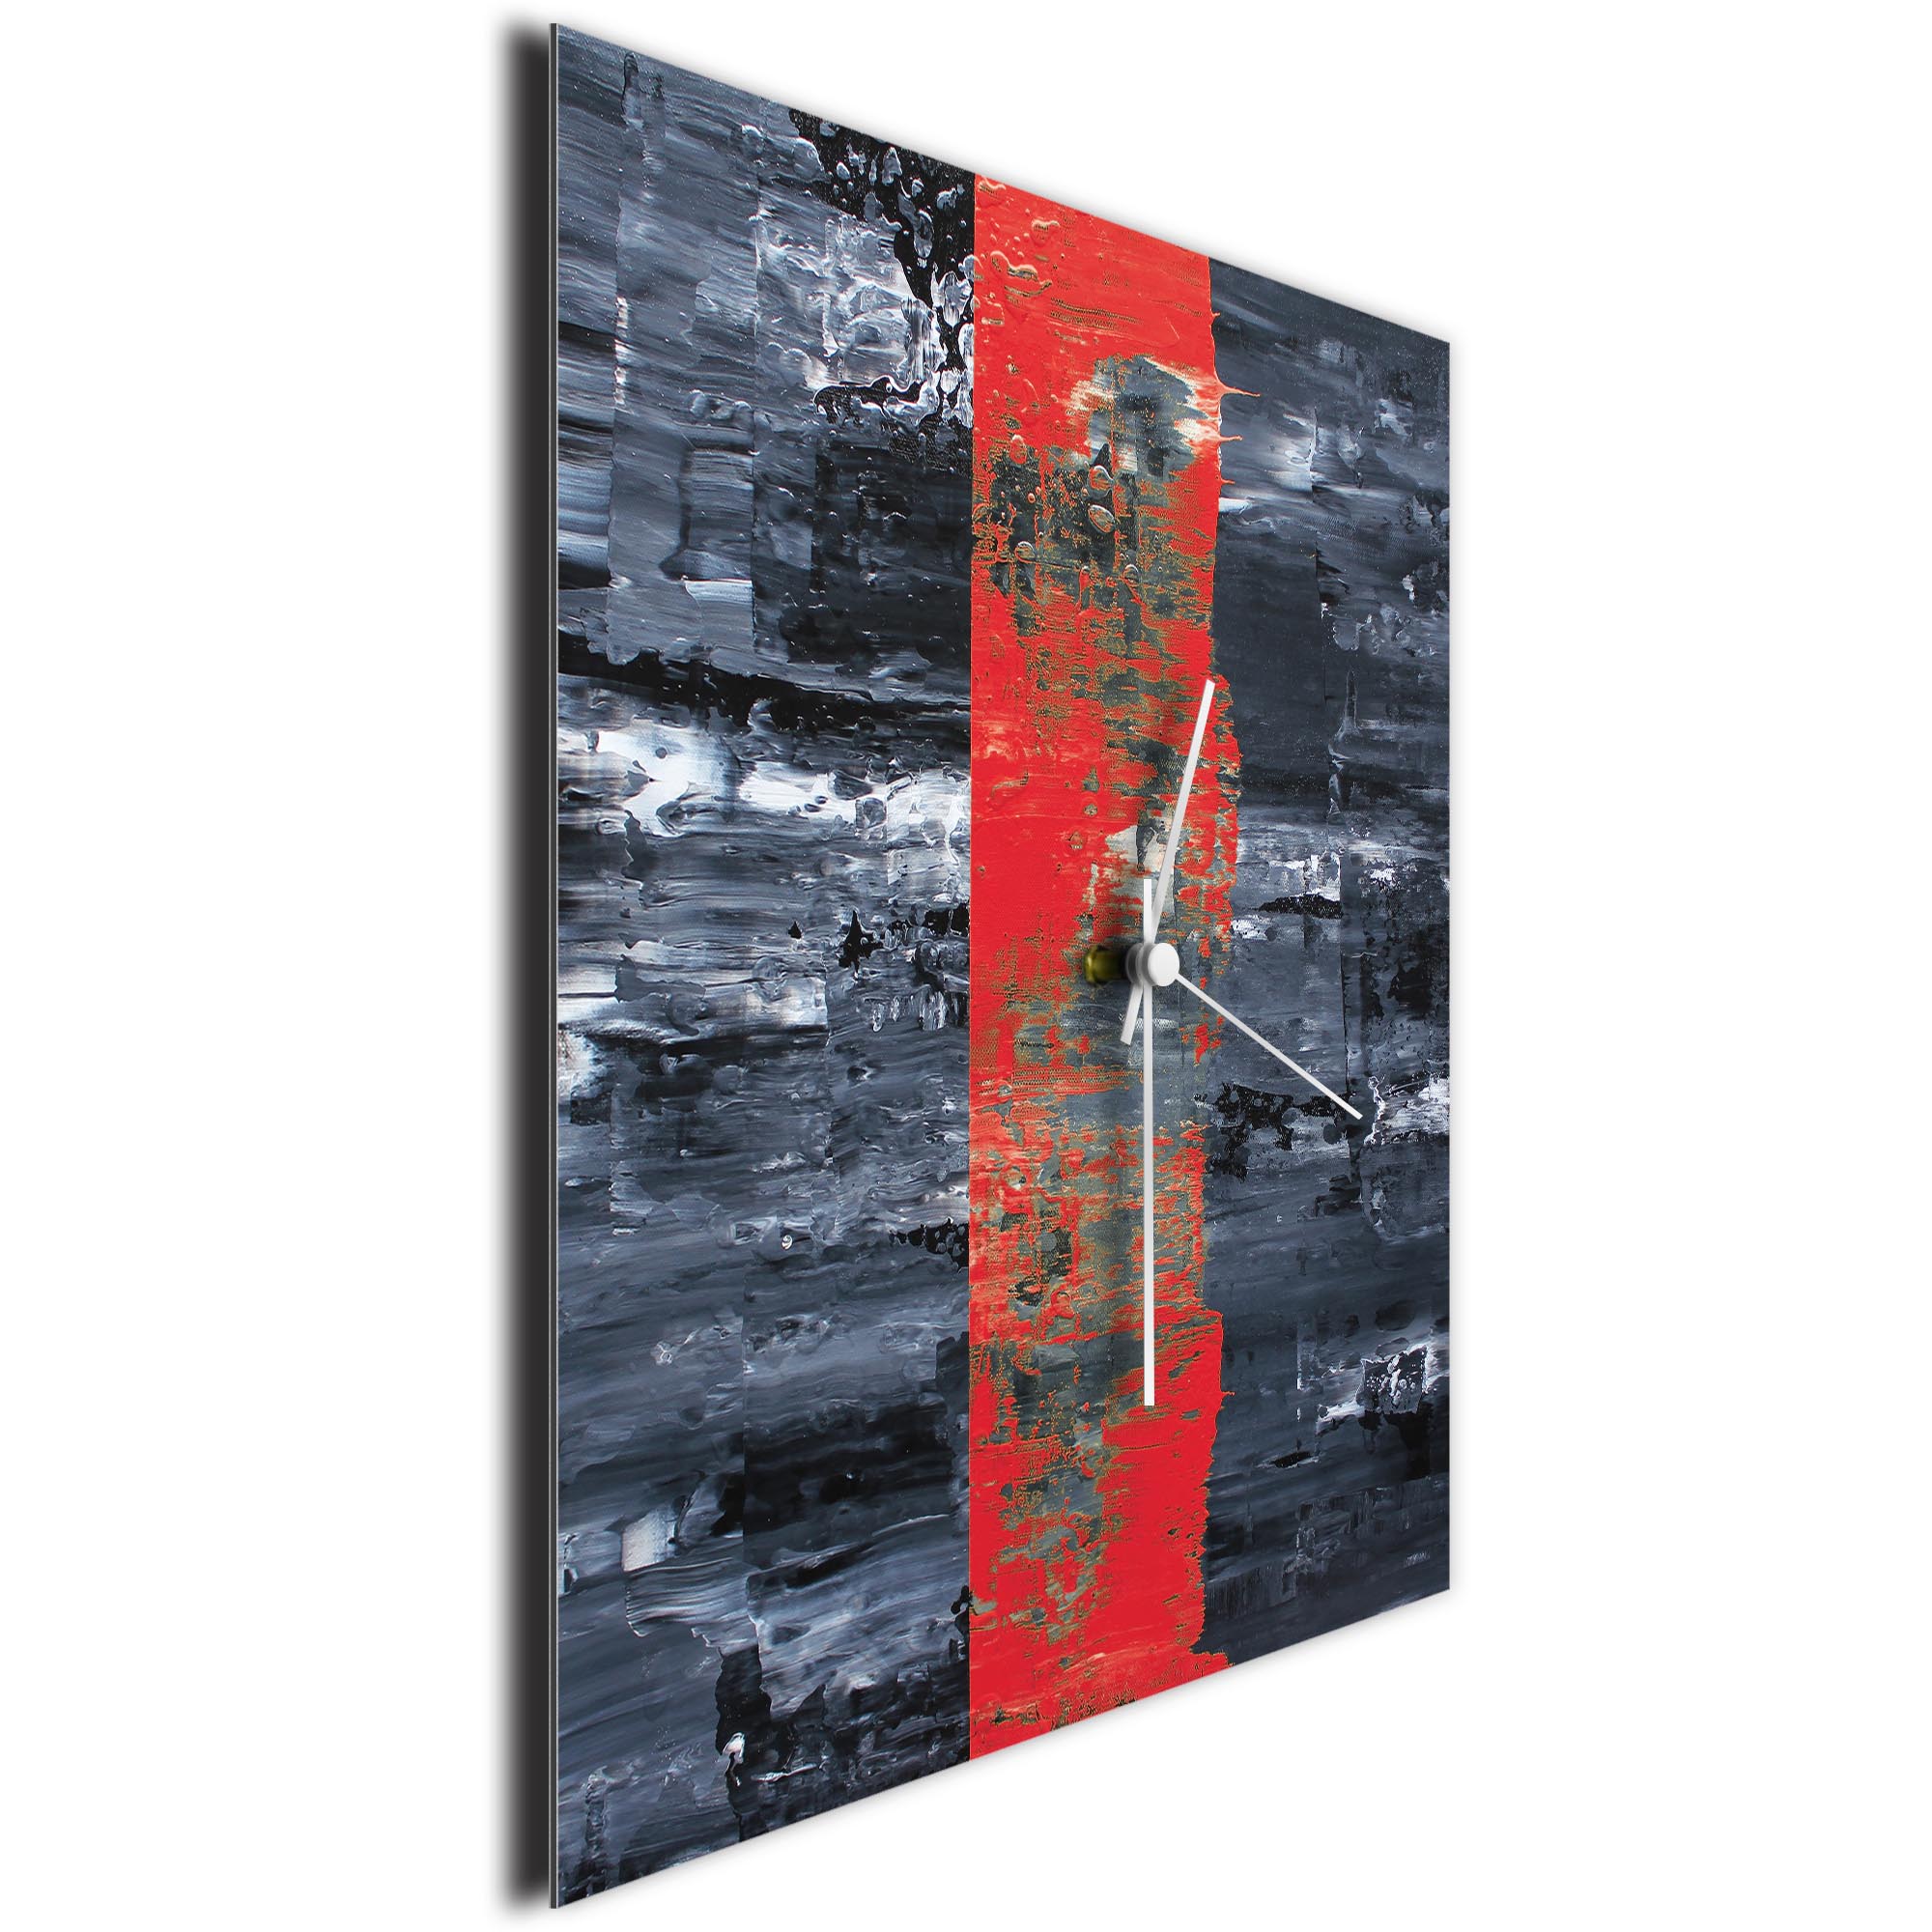 Red Line Square Clock Large by Mendo Vasilevski - Urban Abstract Home Decor - Image 3